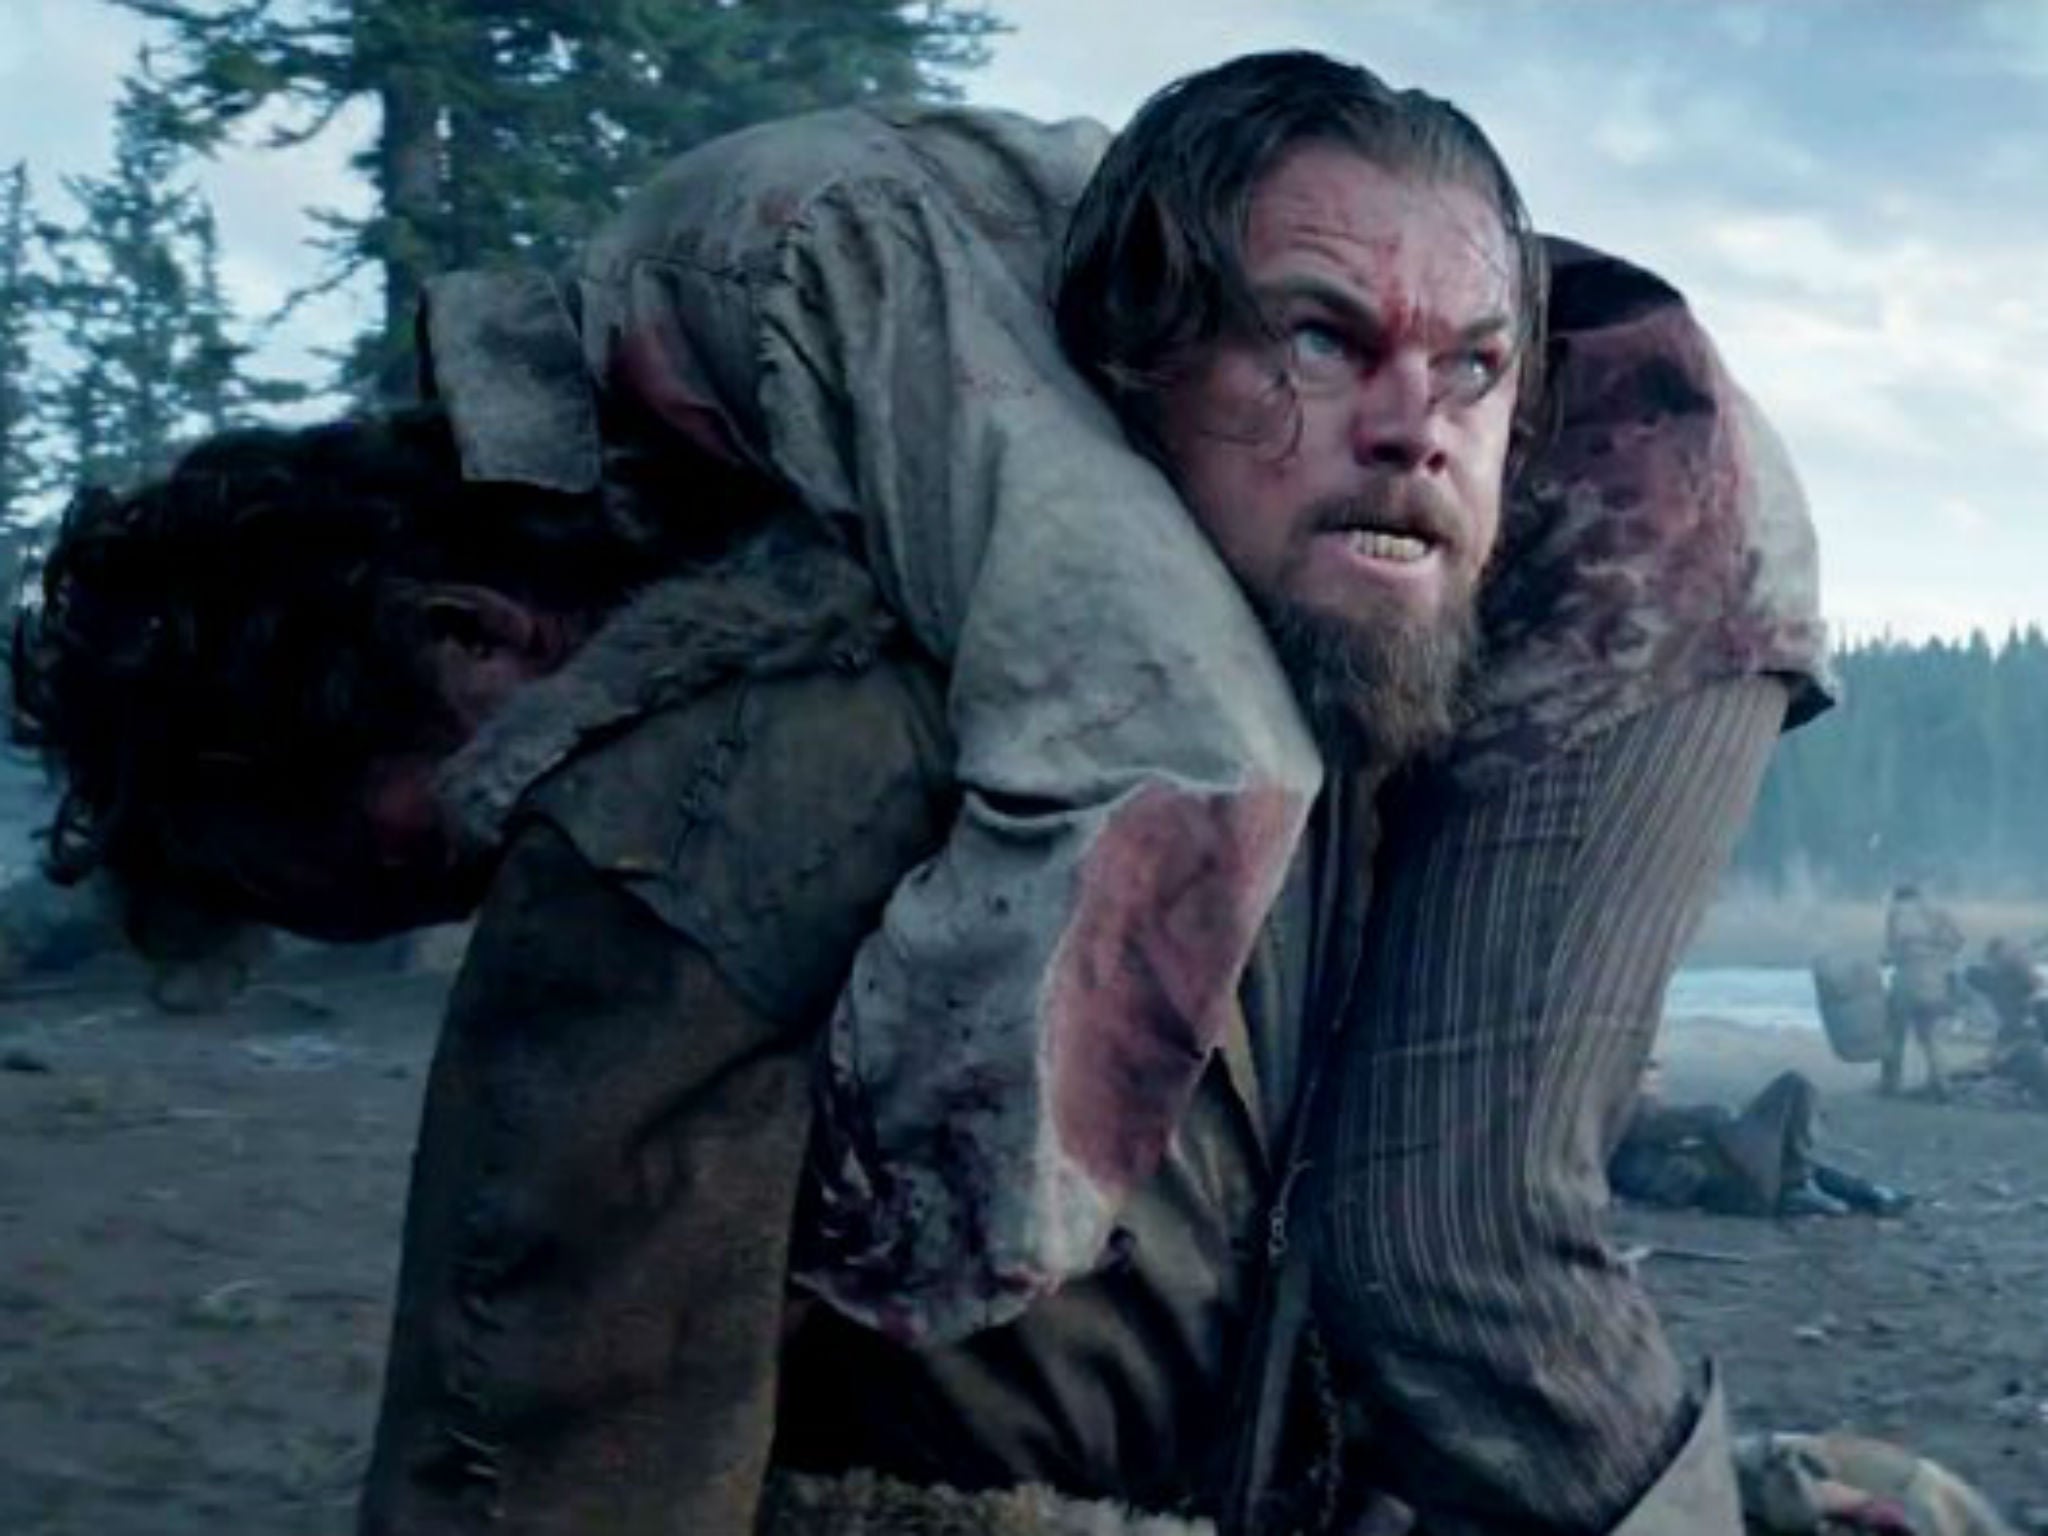 The Revenant has a solid chance of racking up some Oscar nominations according to maths